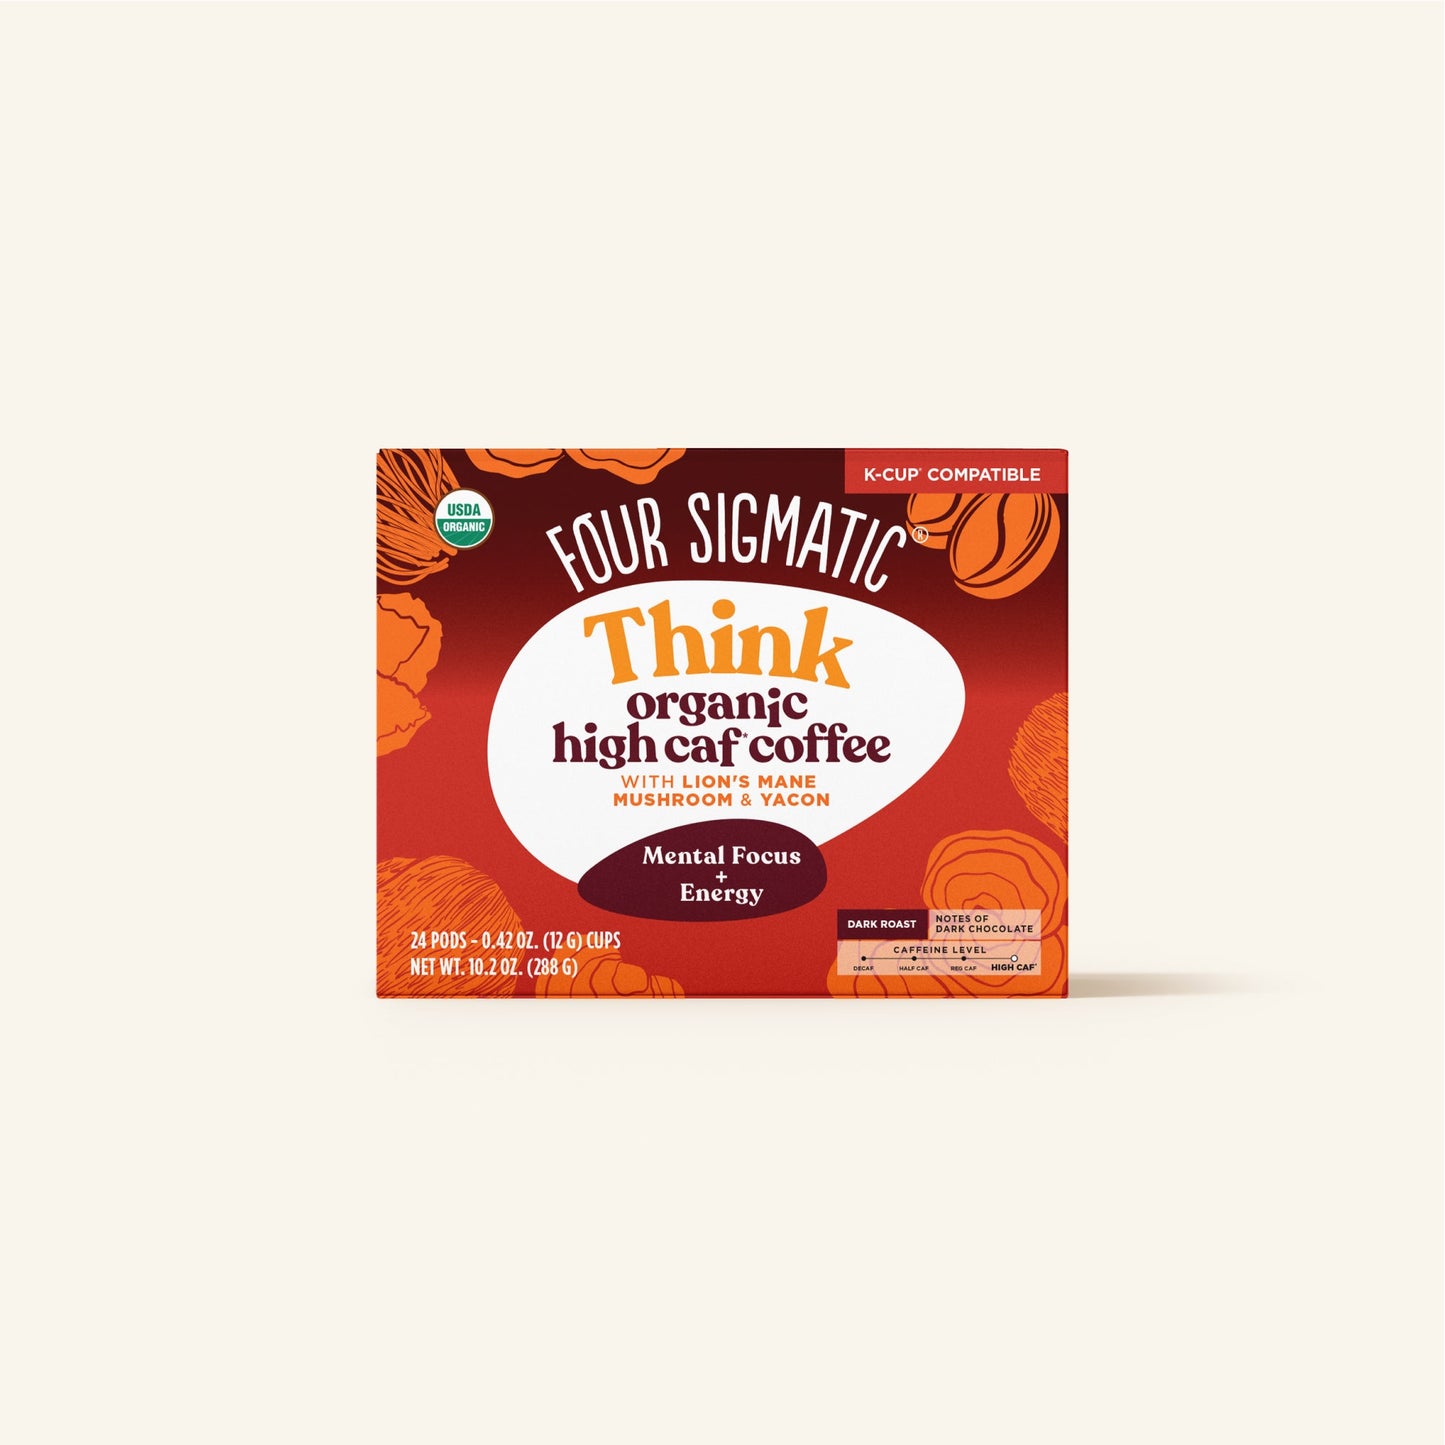 Think High Caf Coffee Pods Box 1-Pack (24ct)